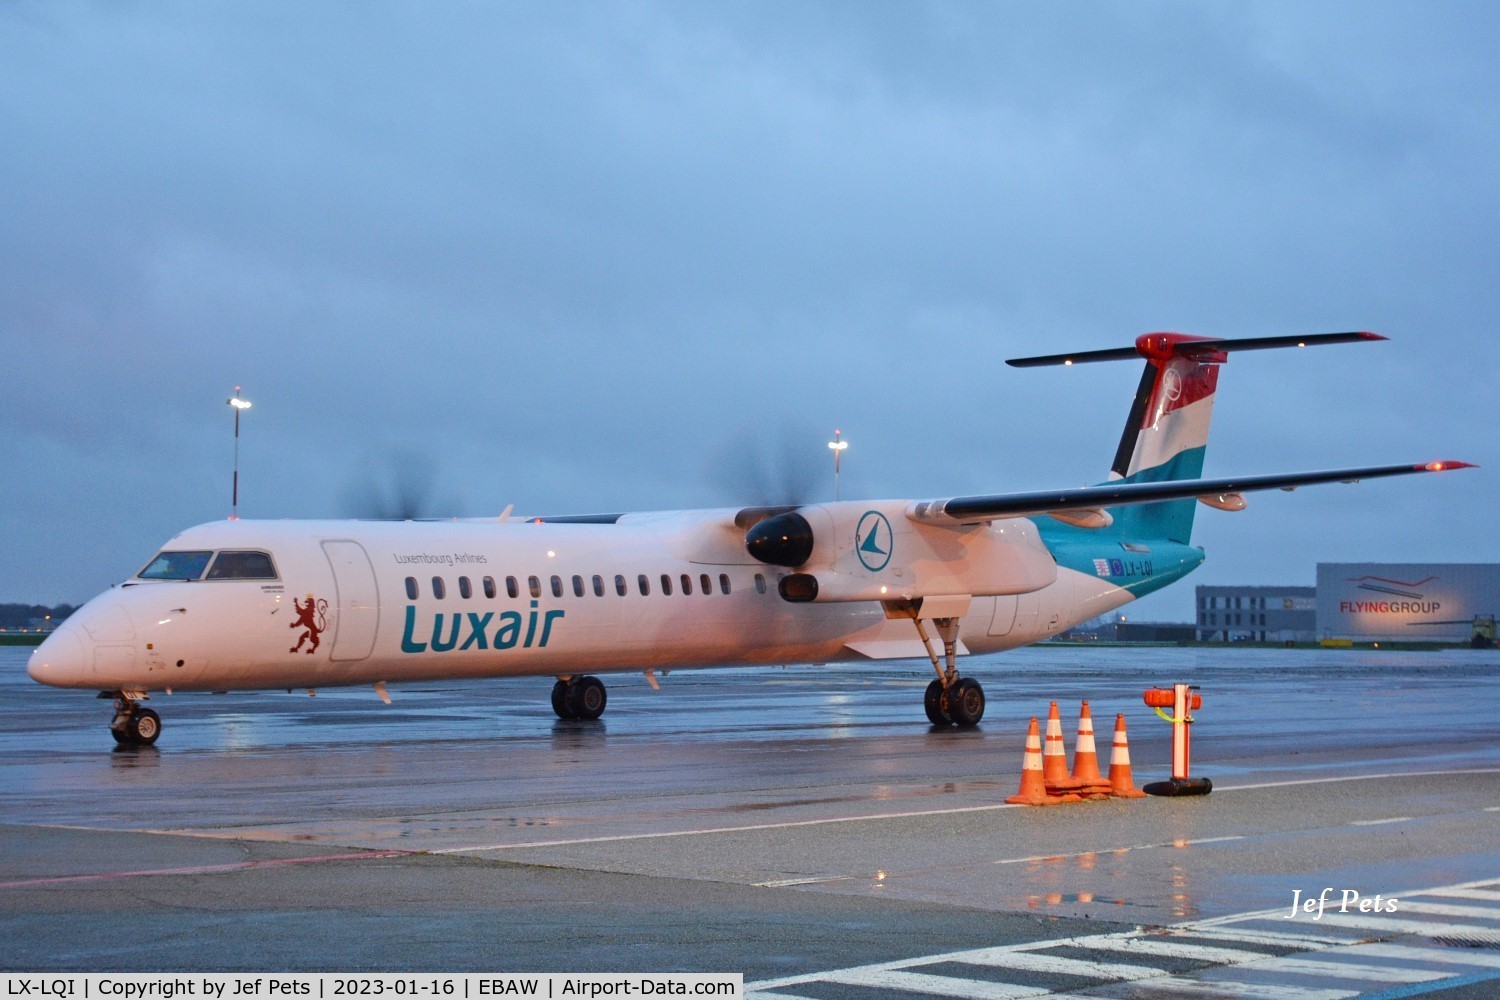 LX-LQI, 2016 Bombardier DHC-8-402Q Dash 8 Dash 8 C/N 4534, Today january 16,  first arrival of Luxair flight LGL4681 from London City LCY to Antwerp Airport. From now on scheduled flights are possible between these two cities.